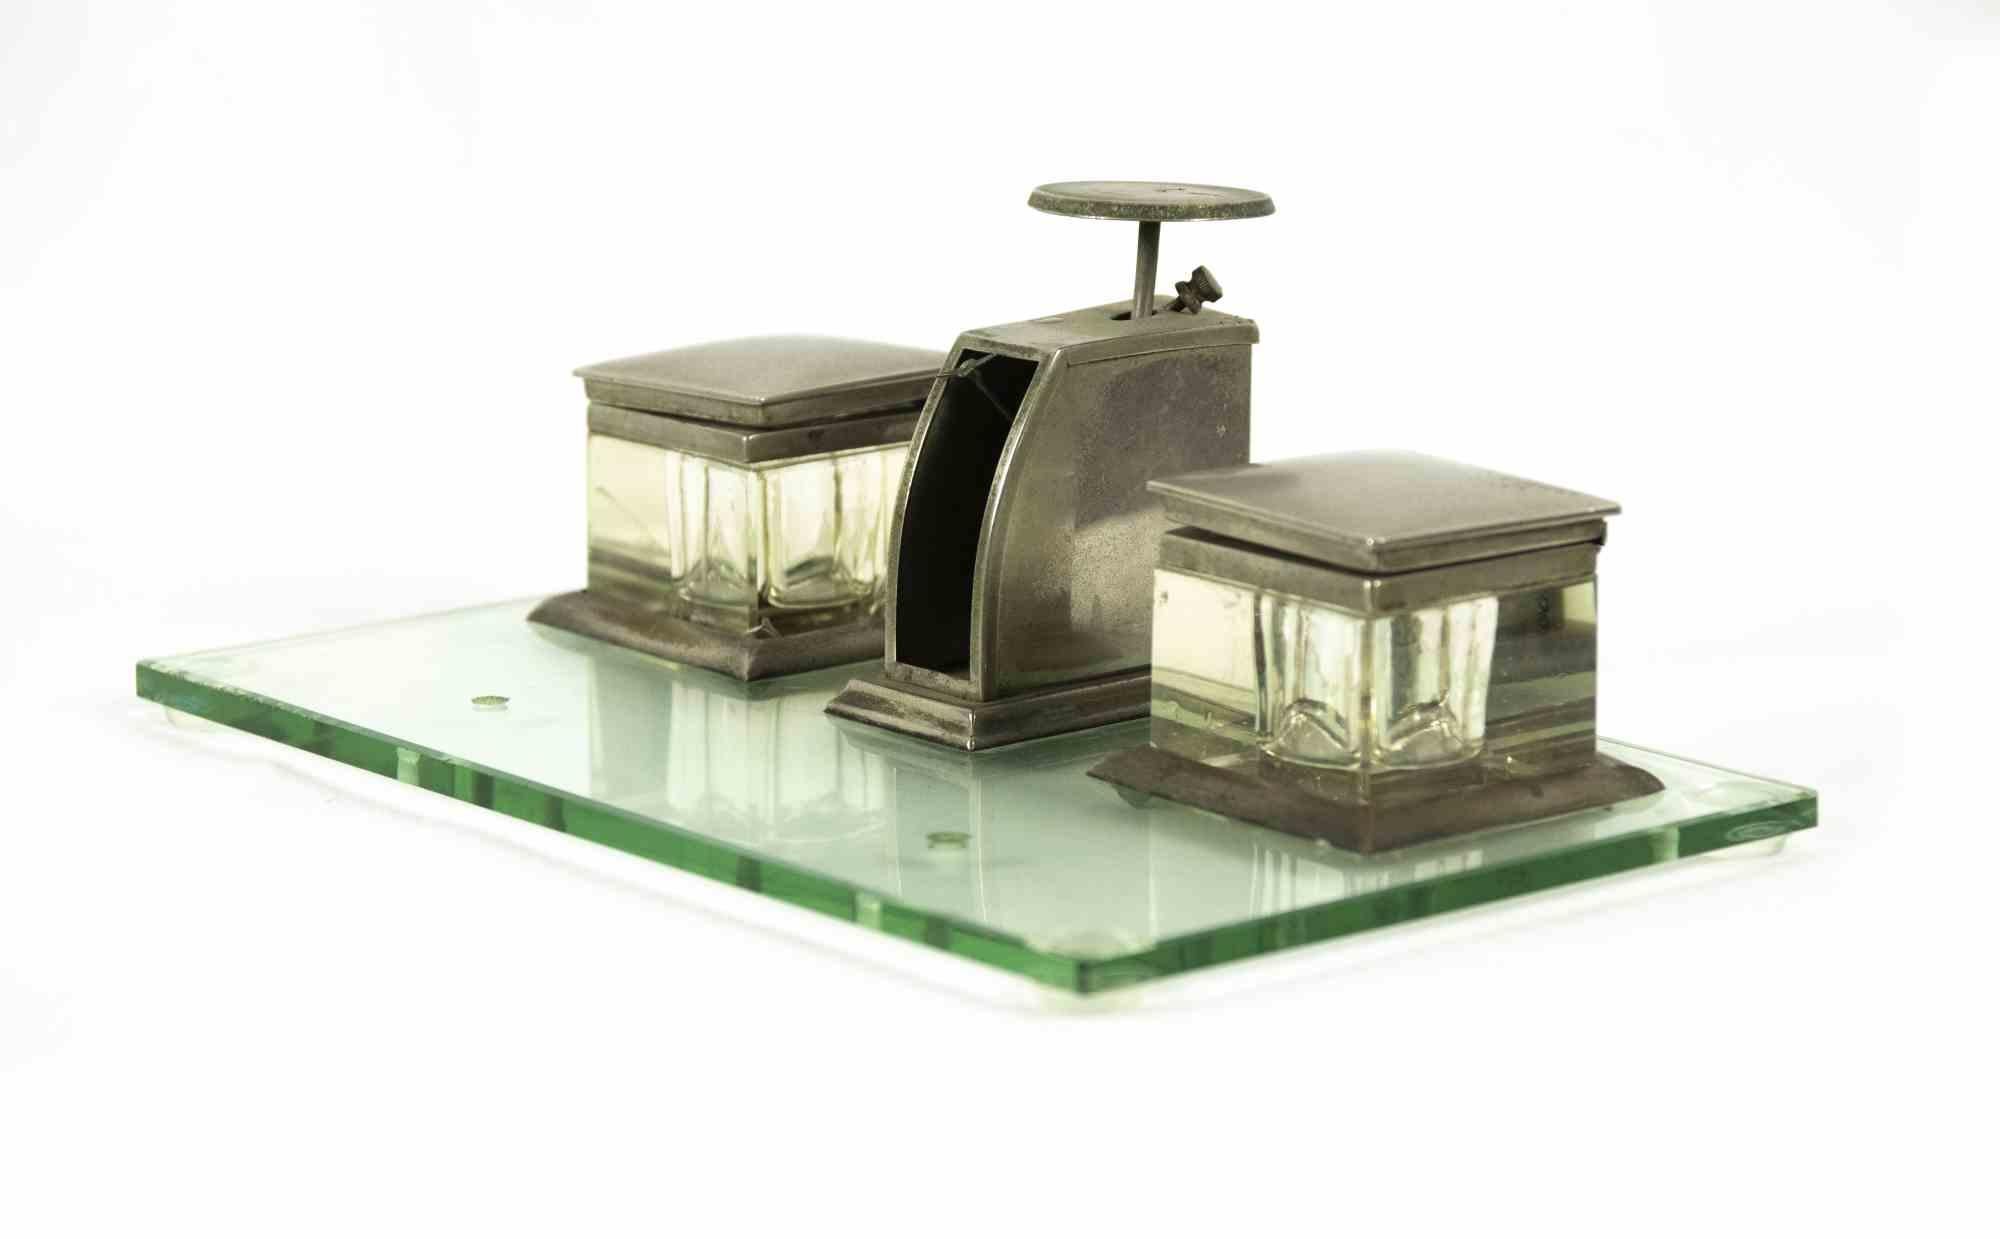 Vintage inkwell is a decorative object realized in the Mid-20th Century

Silver and glass inkwell.

Fair conditions due to the time